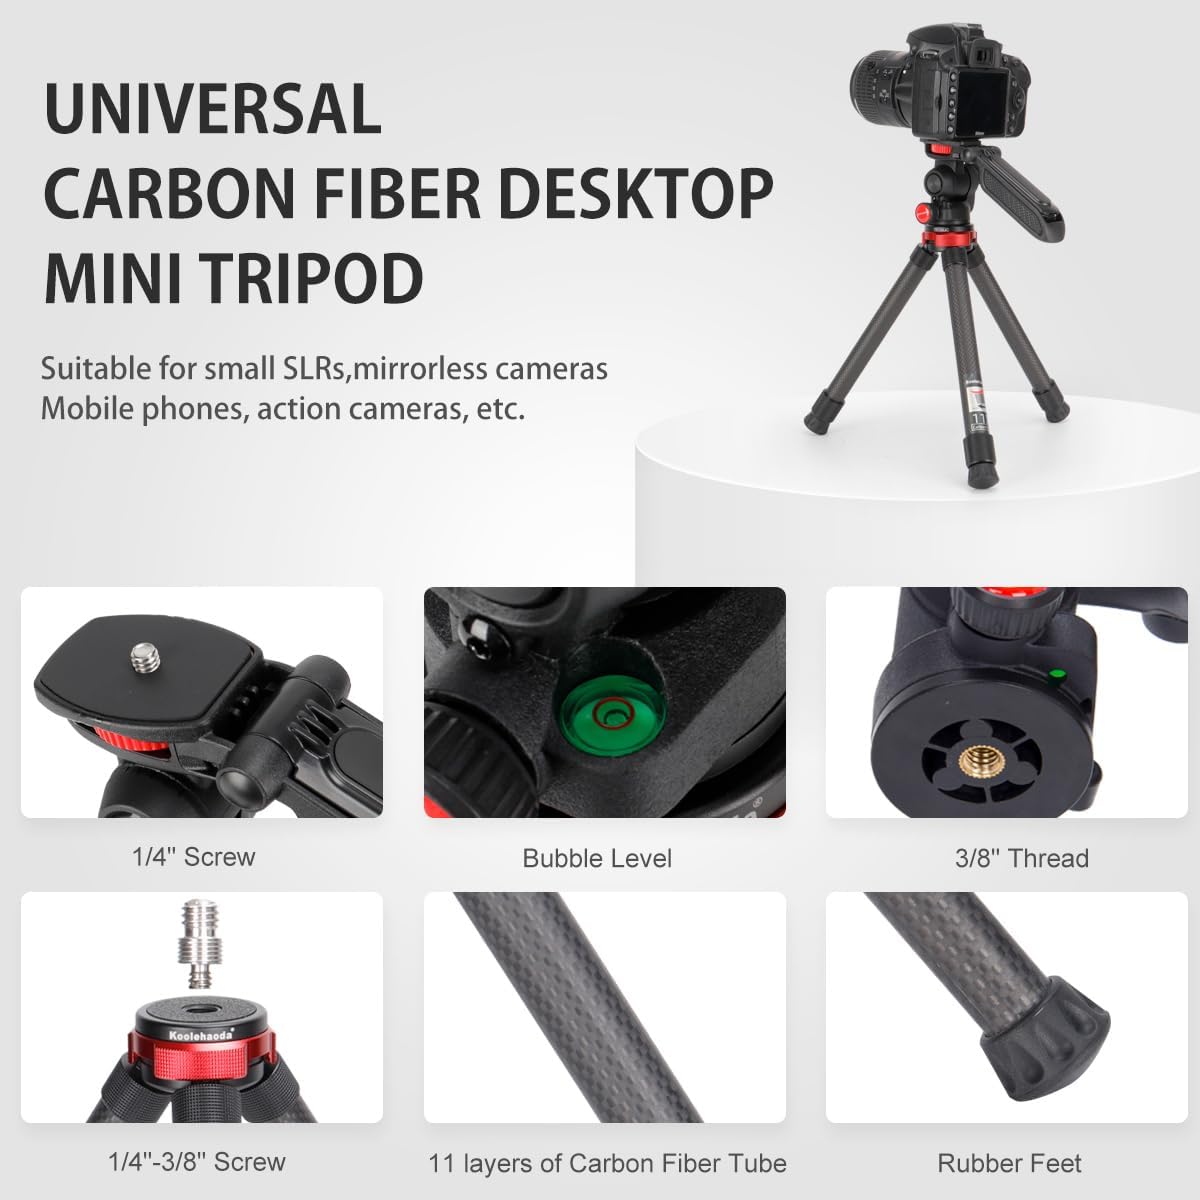 Mini Camera Tripod Carbon Fiber Tabletop Tripod with Phone Holder Handle 360° Pan & Tilt Head, Lightweight and Compact Travel Tripod Desktop Stand for Mirrorless Camera and Smartphone